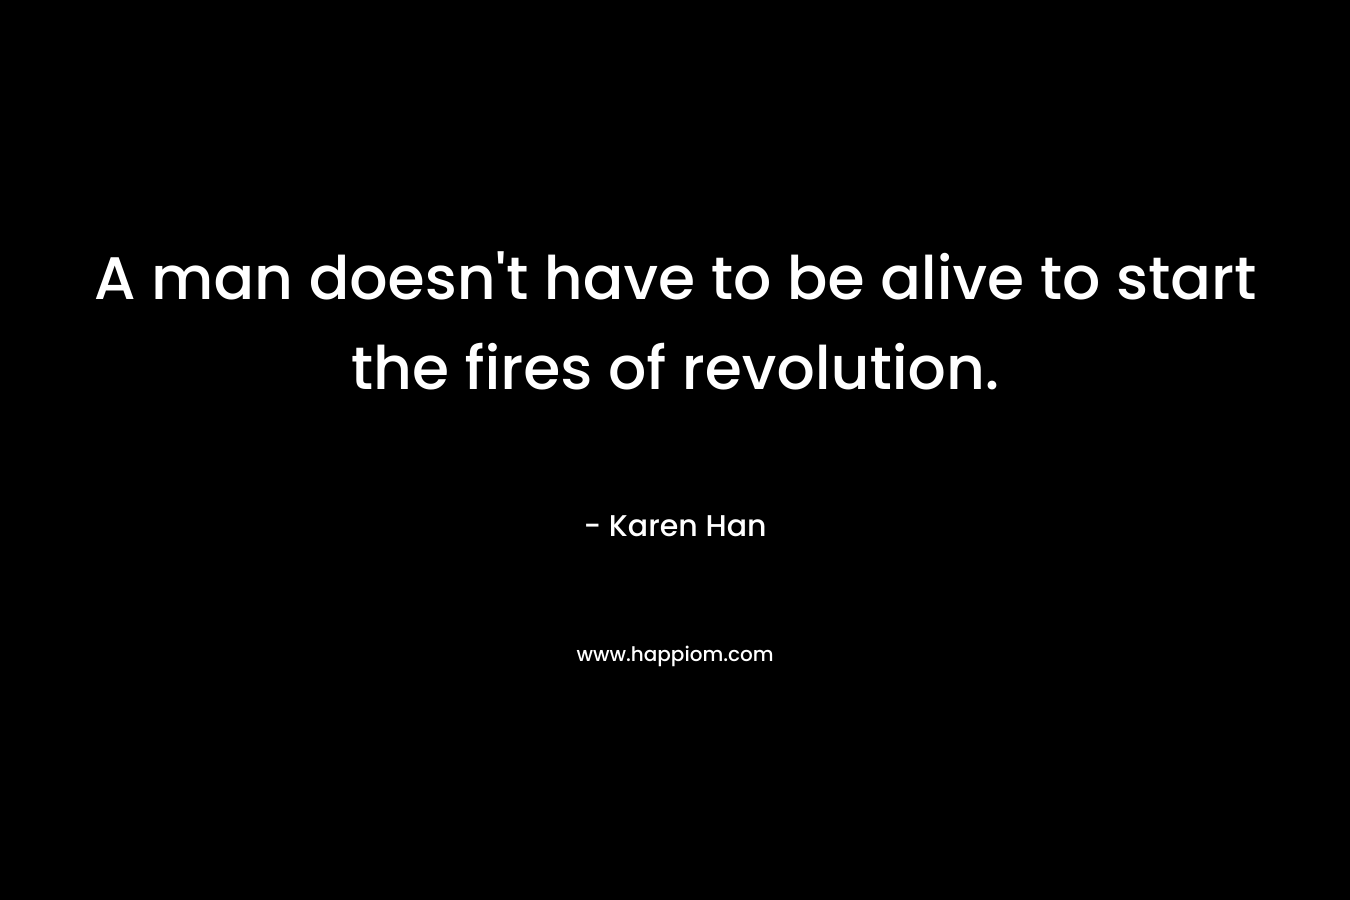 A man doesn’t have to be alive to start the fires of revolution. – Karen Han